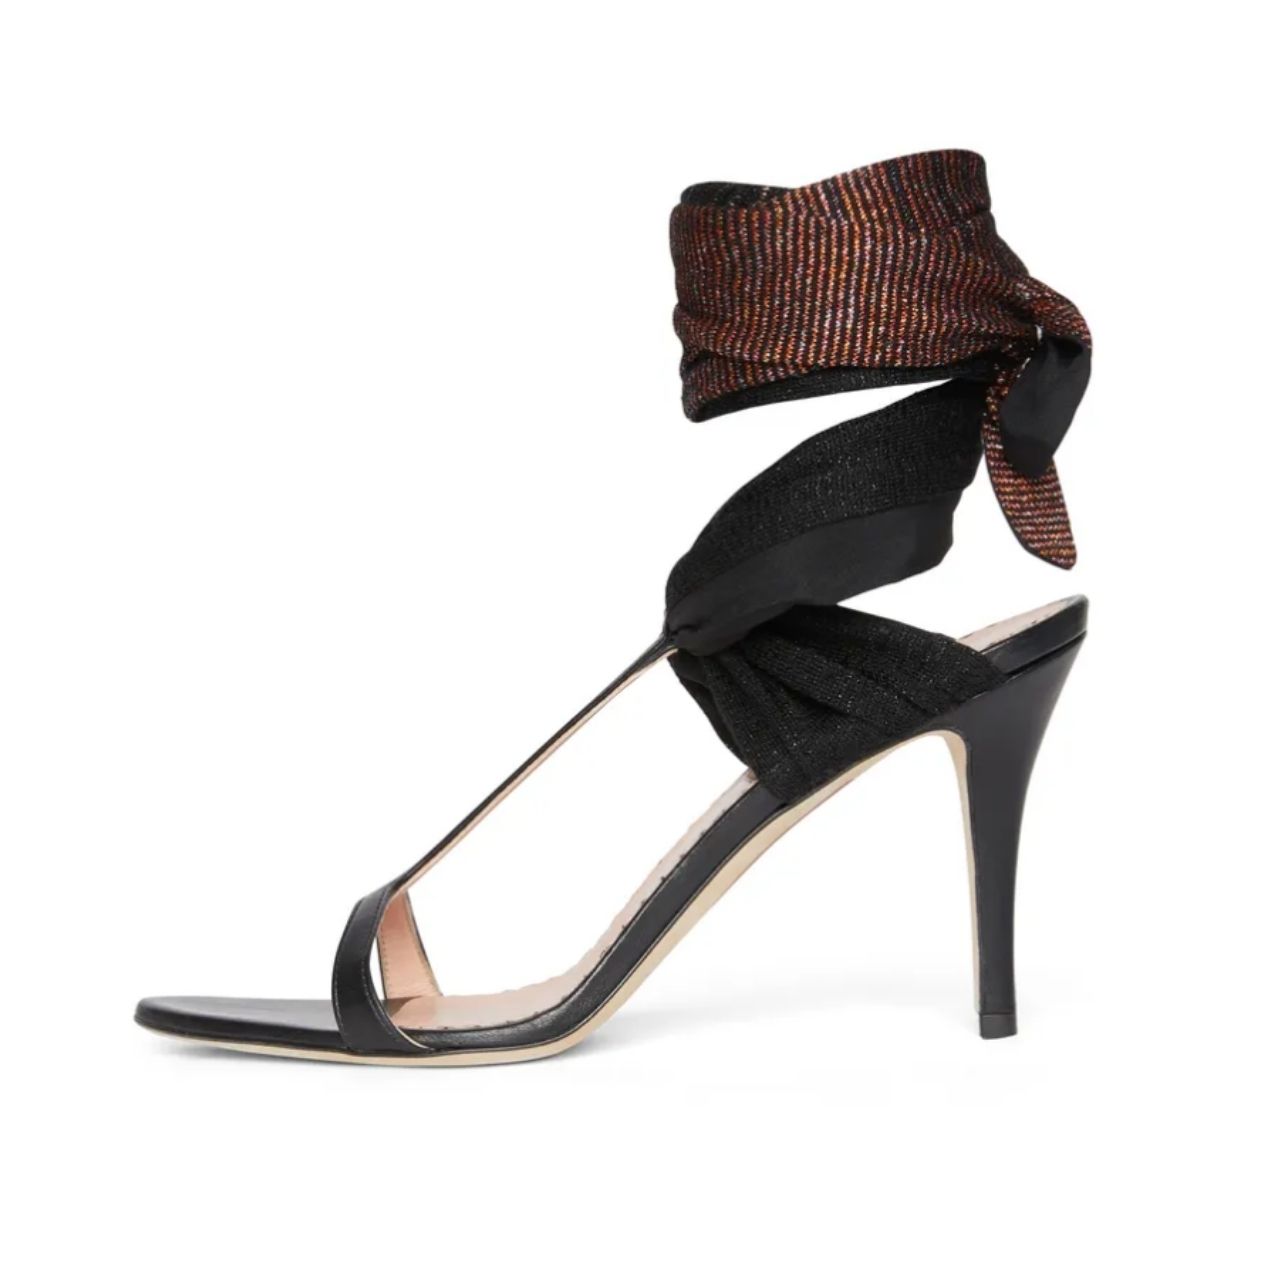 High-heel sandals with a lamé strap